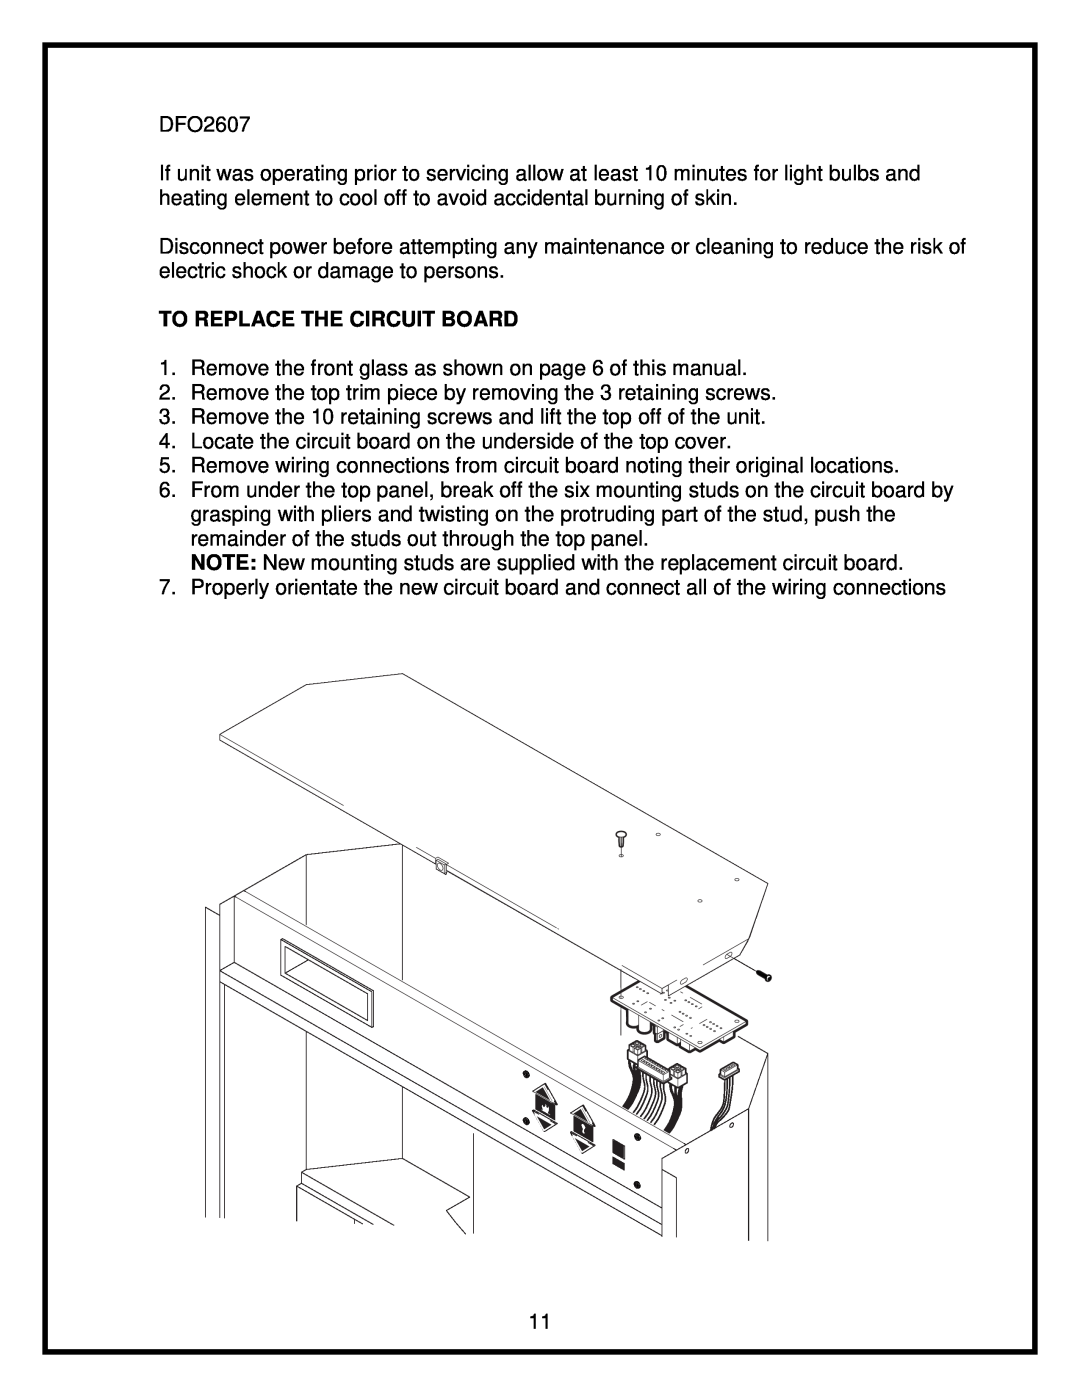 Dimplex 26 service manual To Replace The Circuit Board 